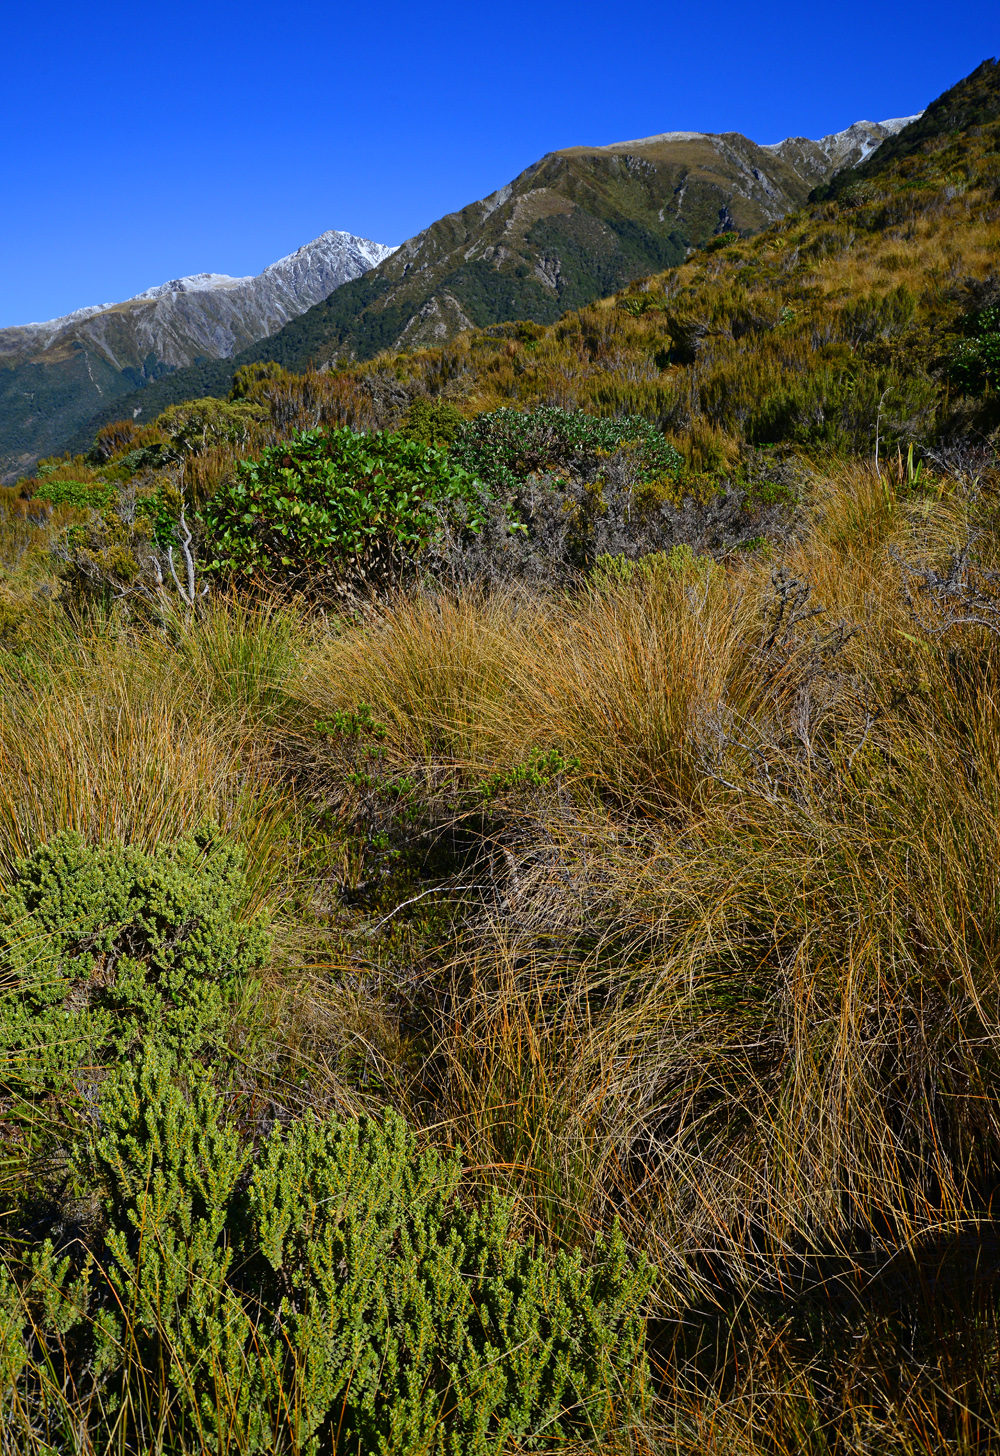 No.28  Coprosma, Hebe, and Tussock